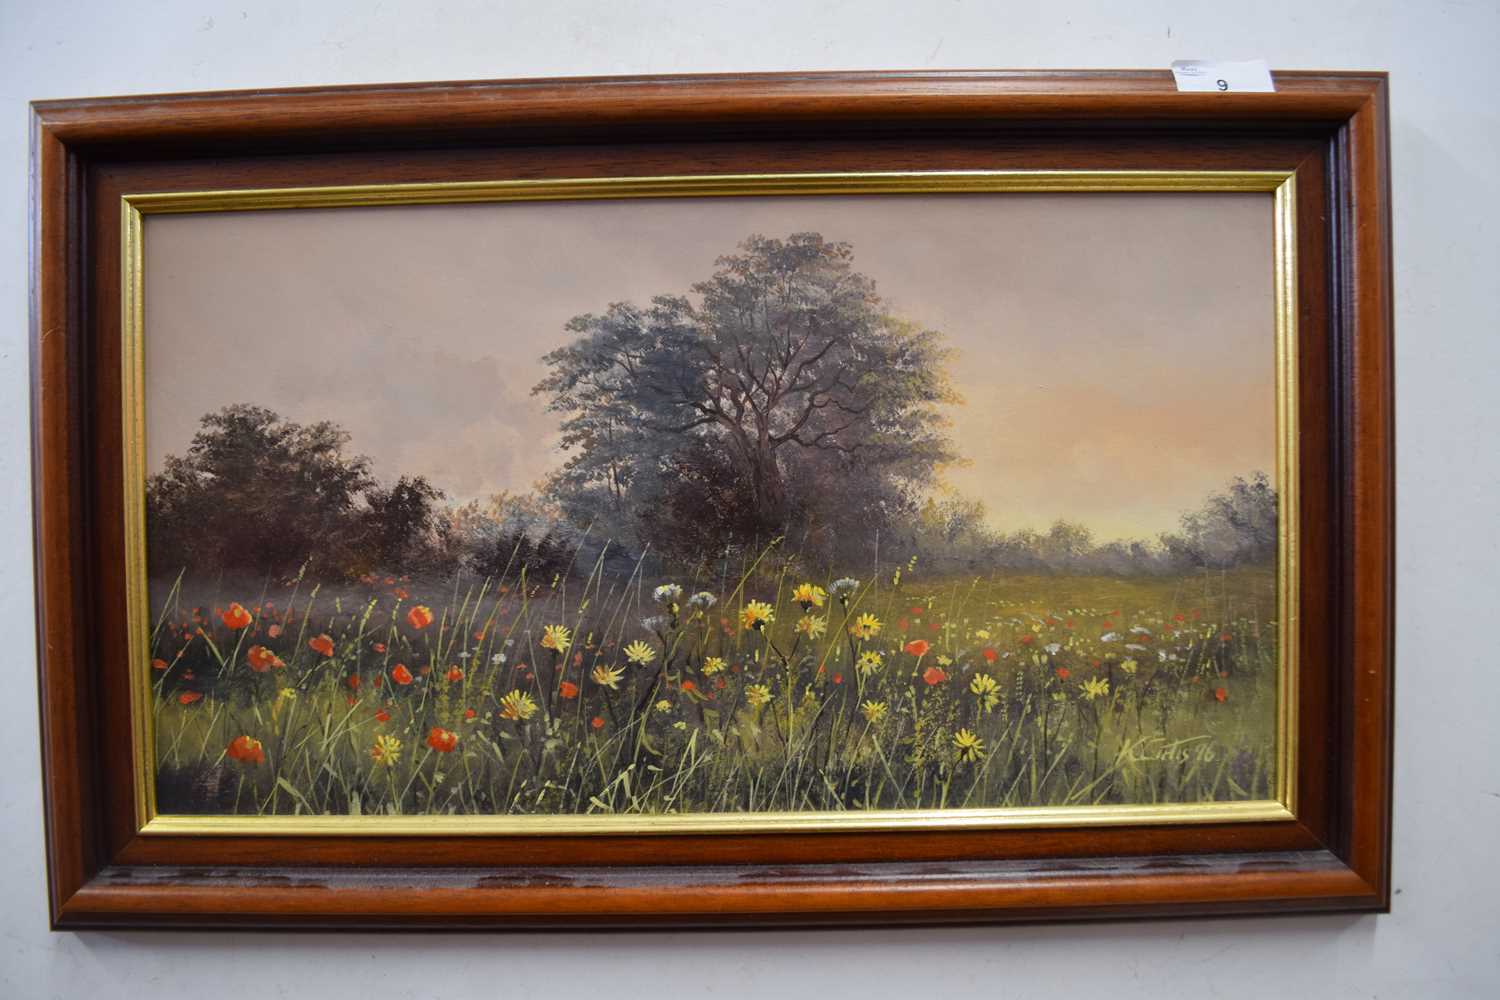 Kevin Curtis (British, 20th century), 'Summer Flowers', oil on board, signed and dated 96, 9.5x17. - Image 2 of 2